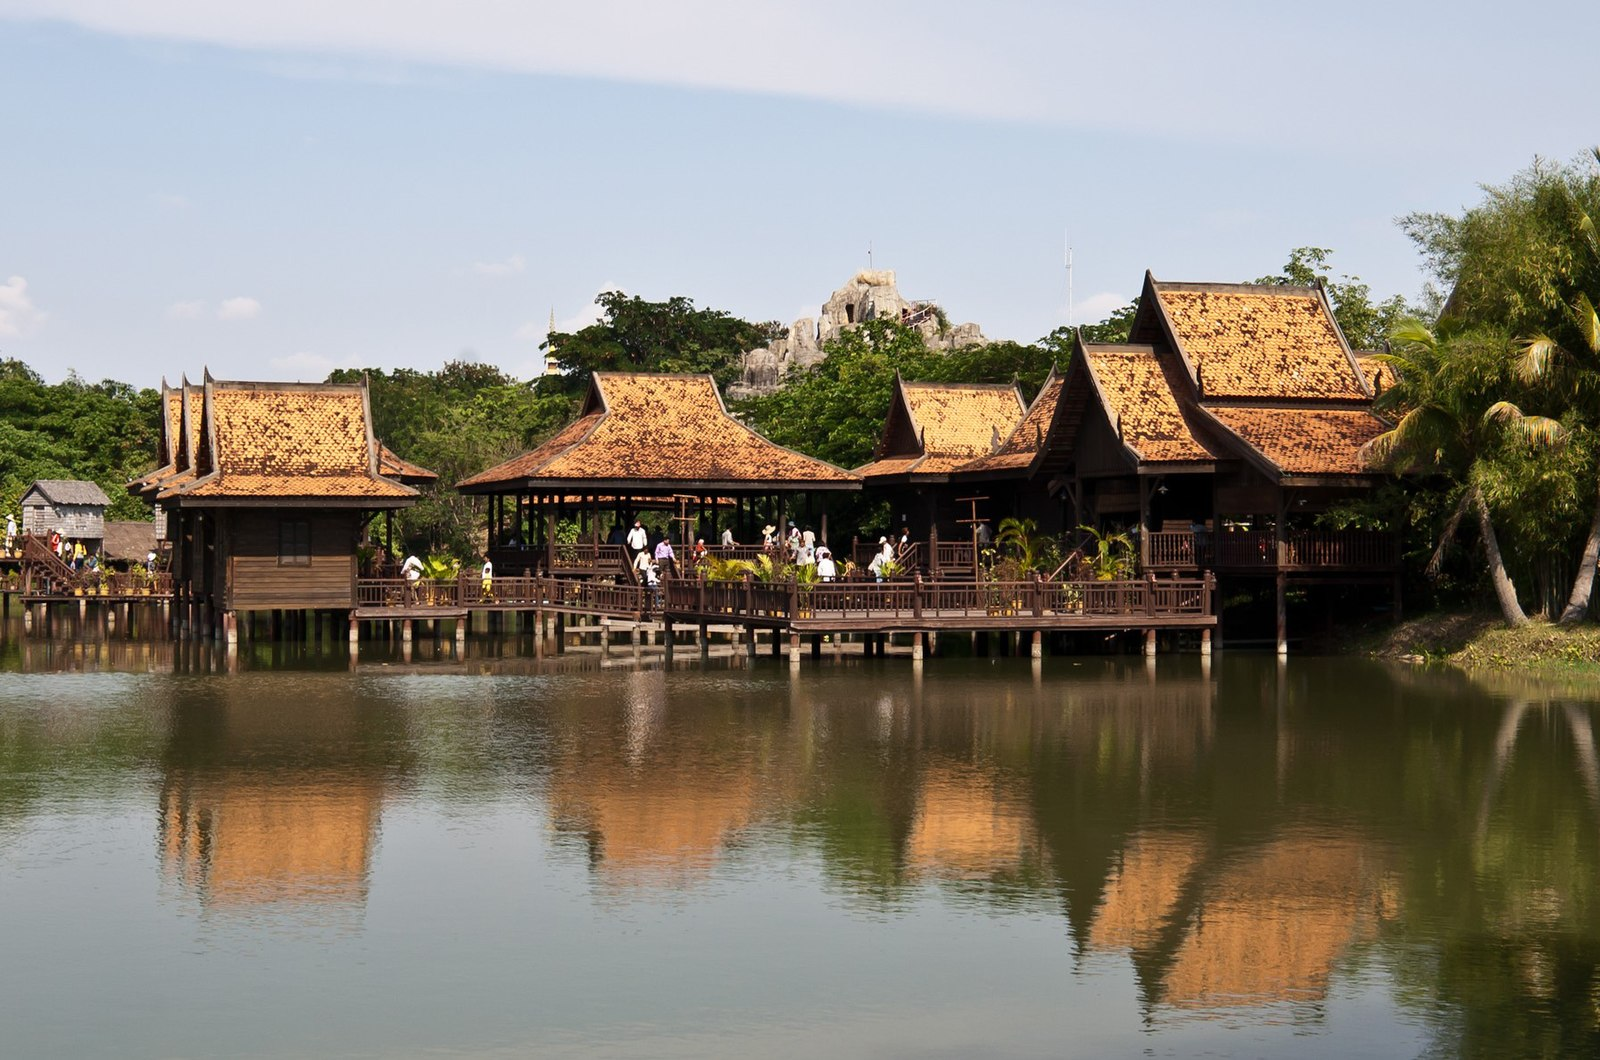 Siem Reap’s many outdoor attractions, their cultural villages